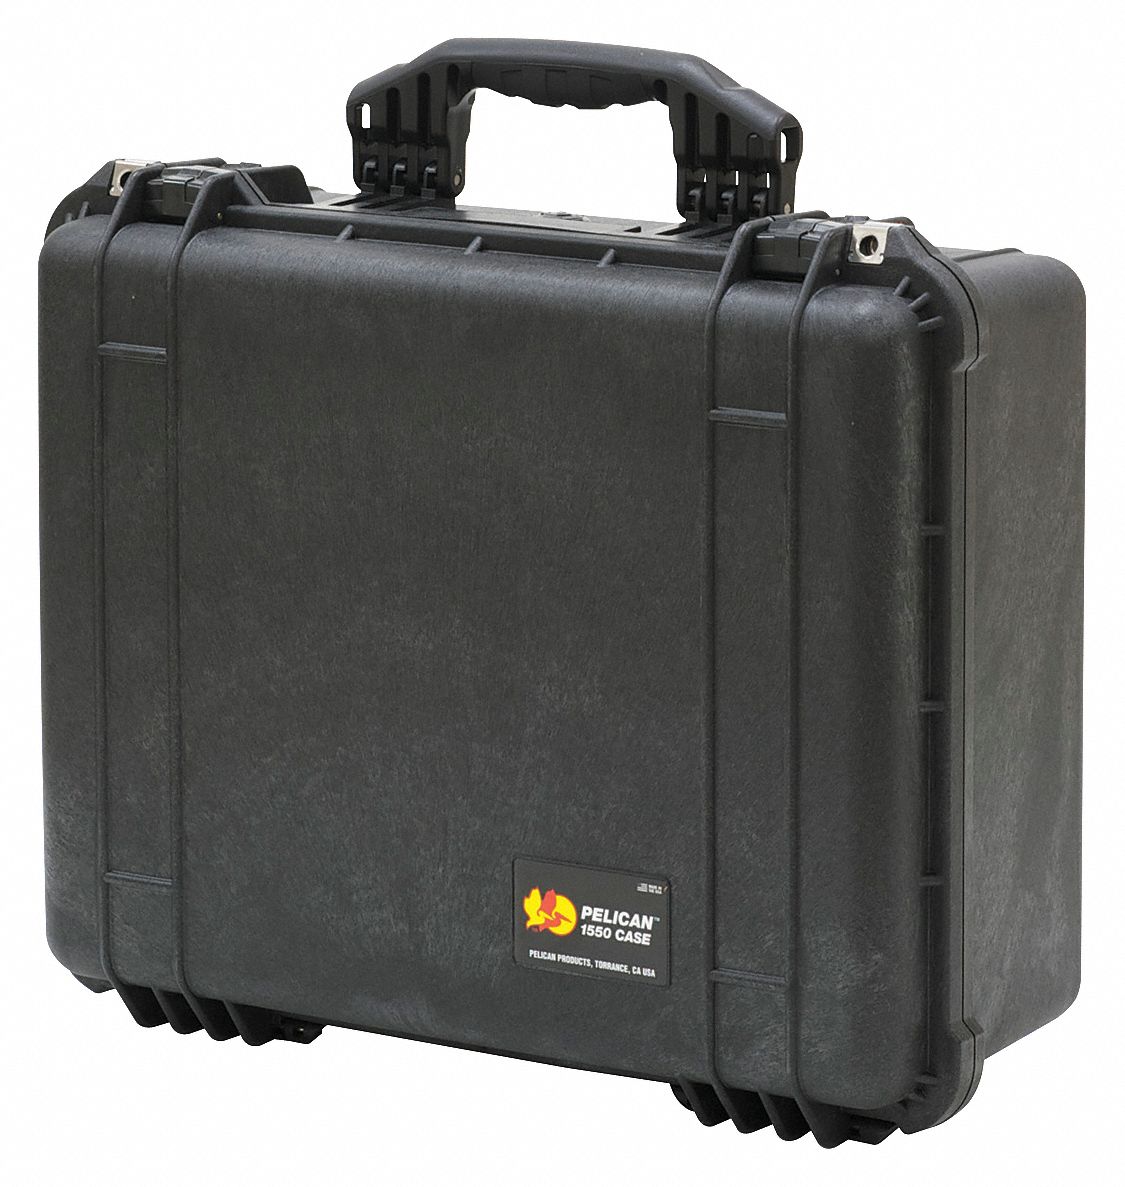 30PH45 - Carrying Case